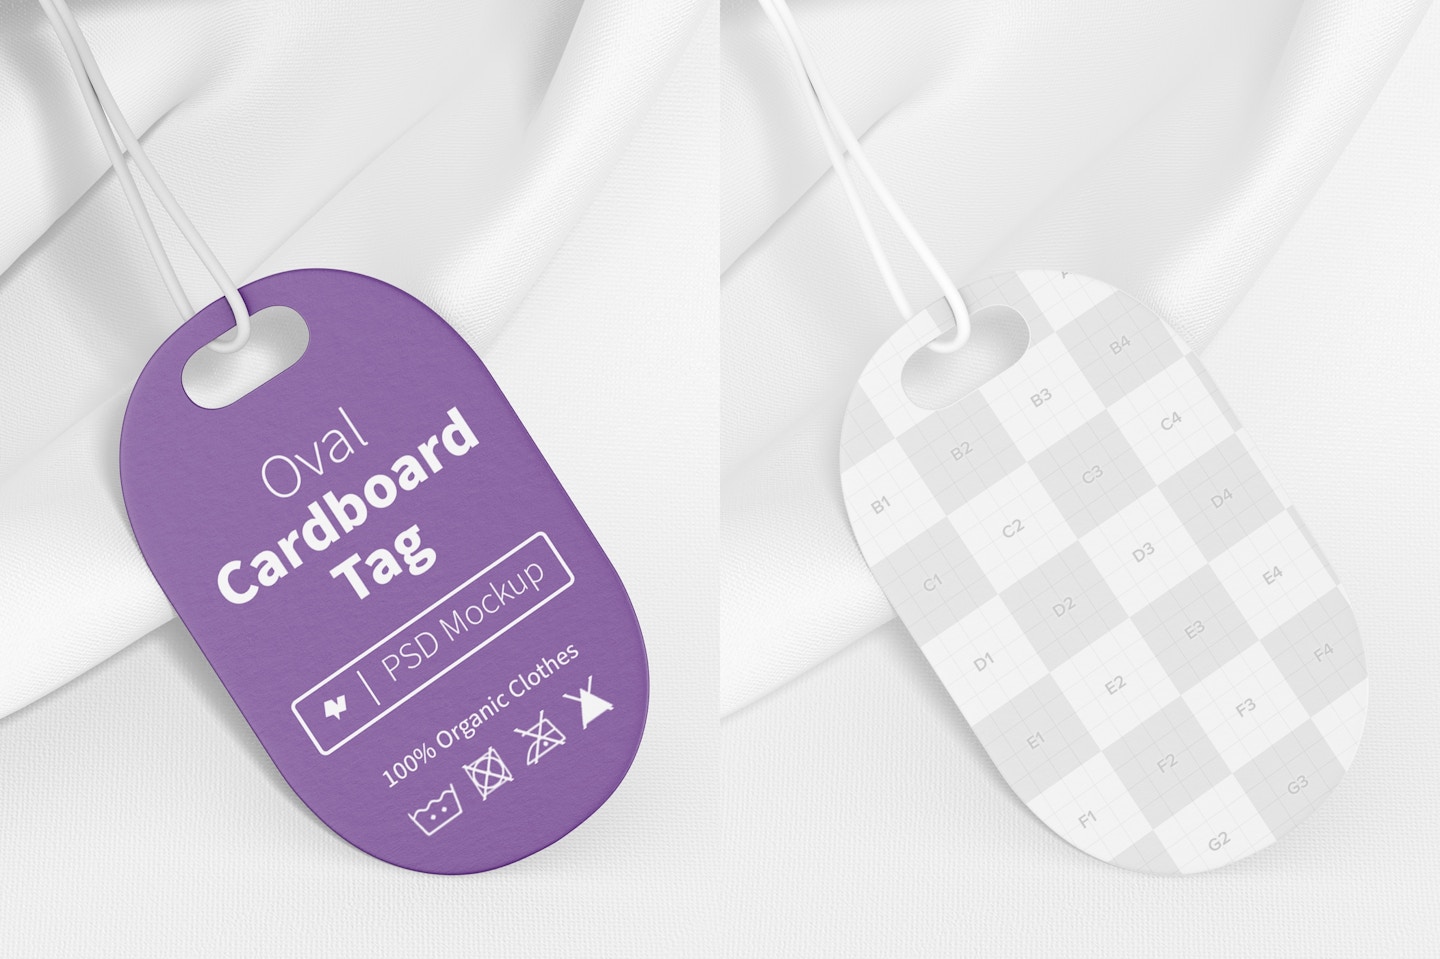 Oval Cardboard Tag with a T-Shirt Mockup